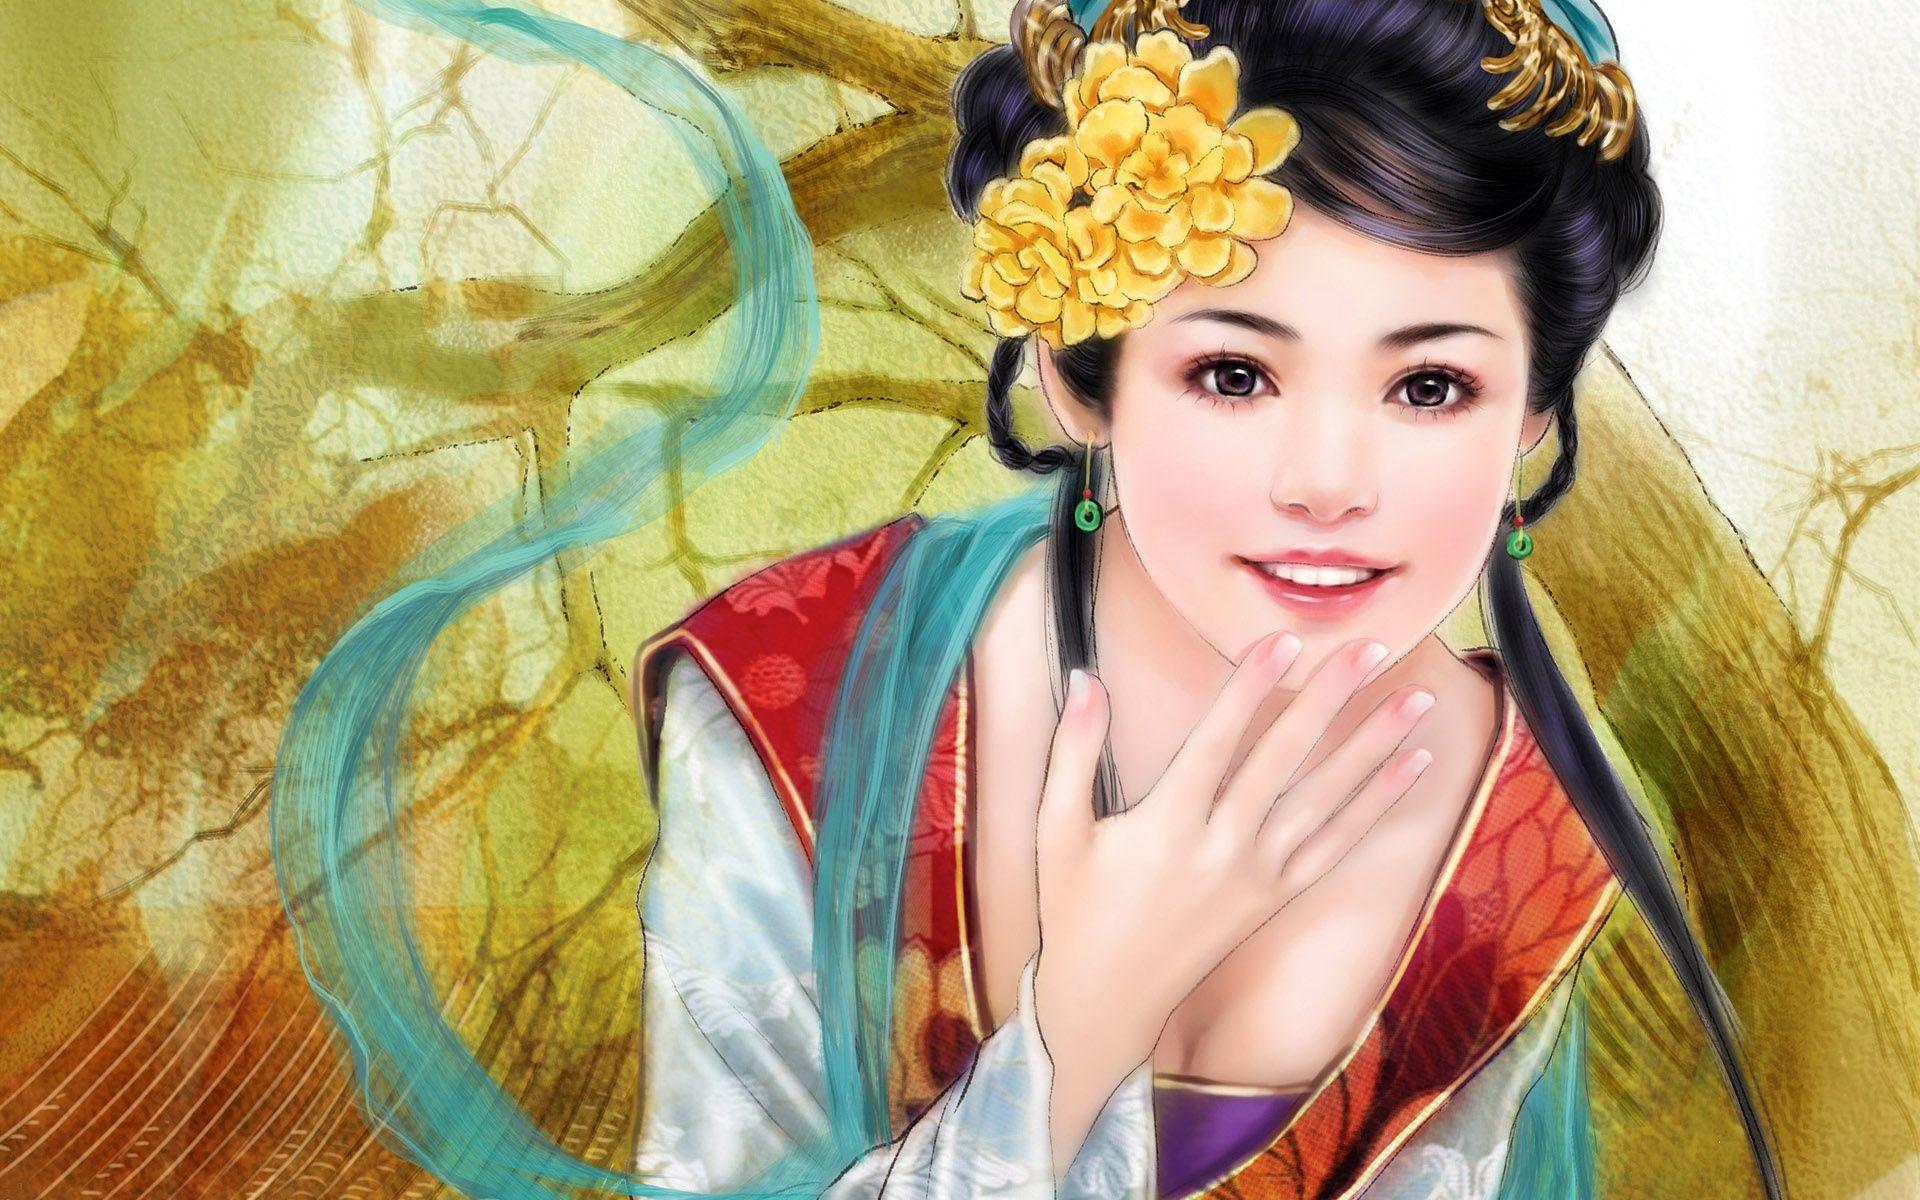 Gorgeous Japanese girl painting. art. Painting of girl